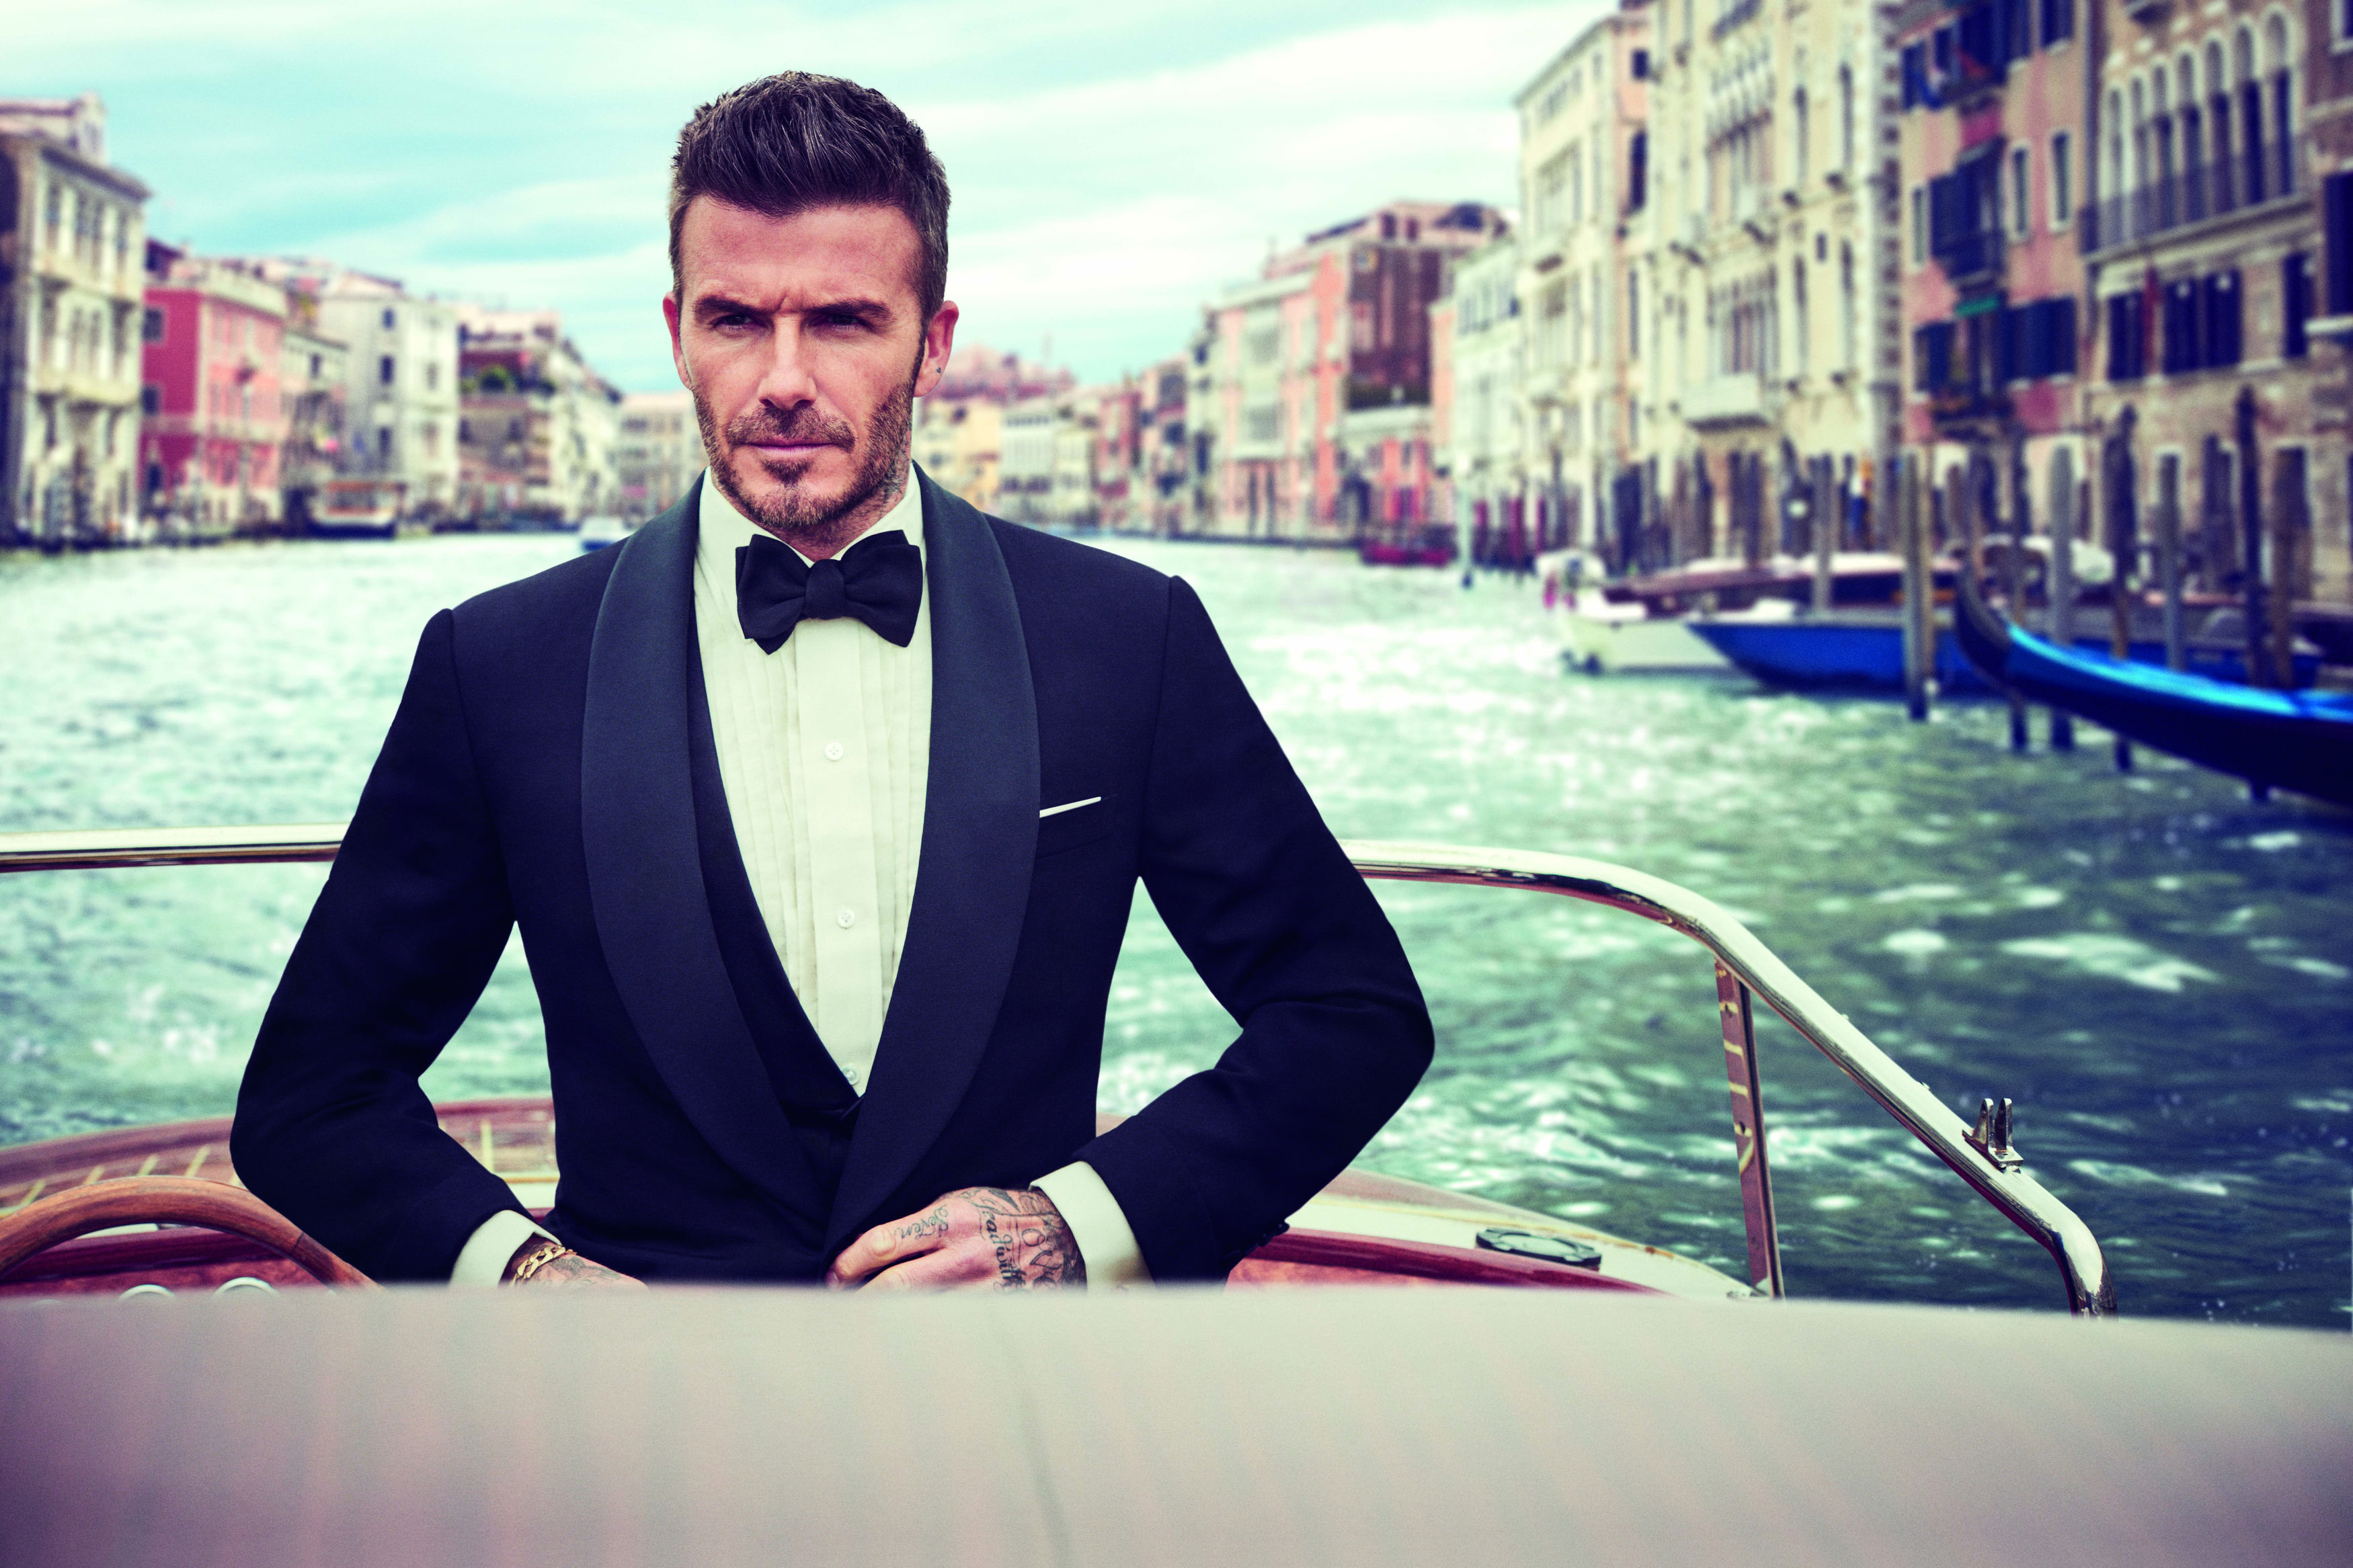 David Beckham Facebook Cover Photo as he looks to somewhere while in the boat and behind him is as river